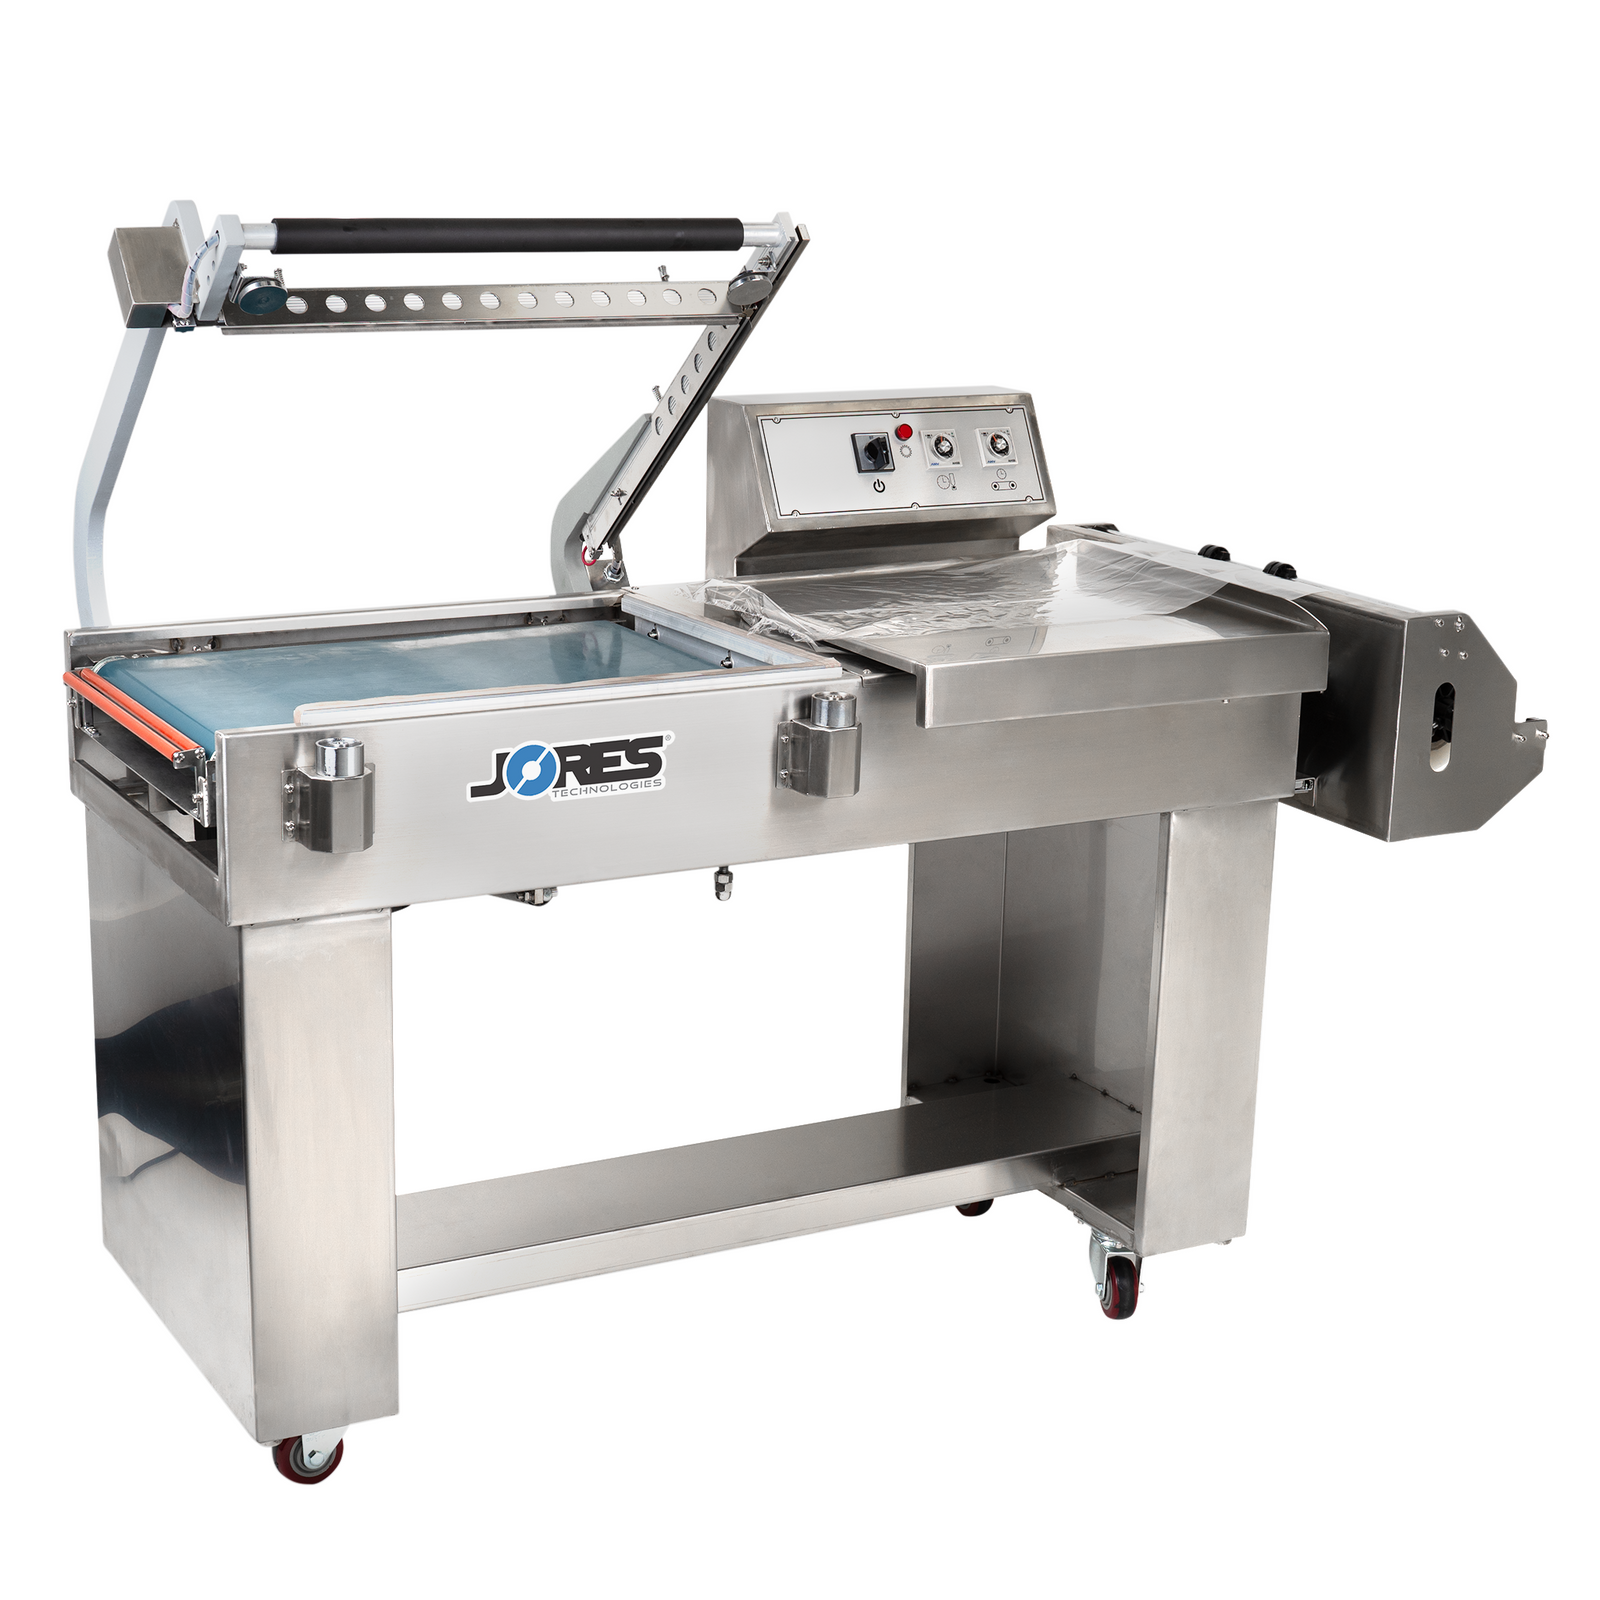 Stainless steel semi-automatic L bar heat sealer with conveyor by JORES TECHNOLOGIES® 